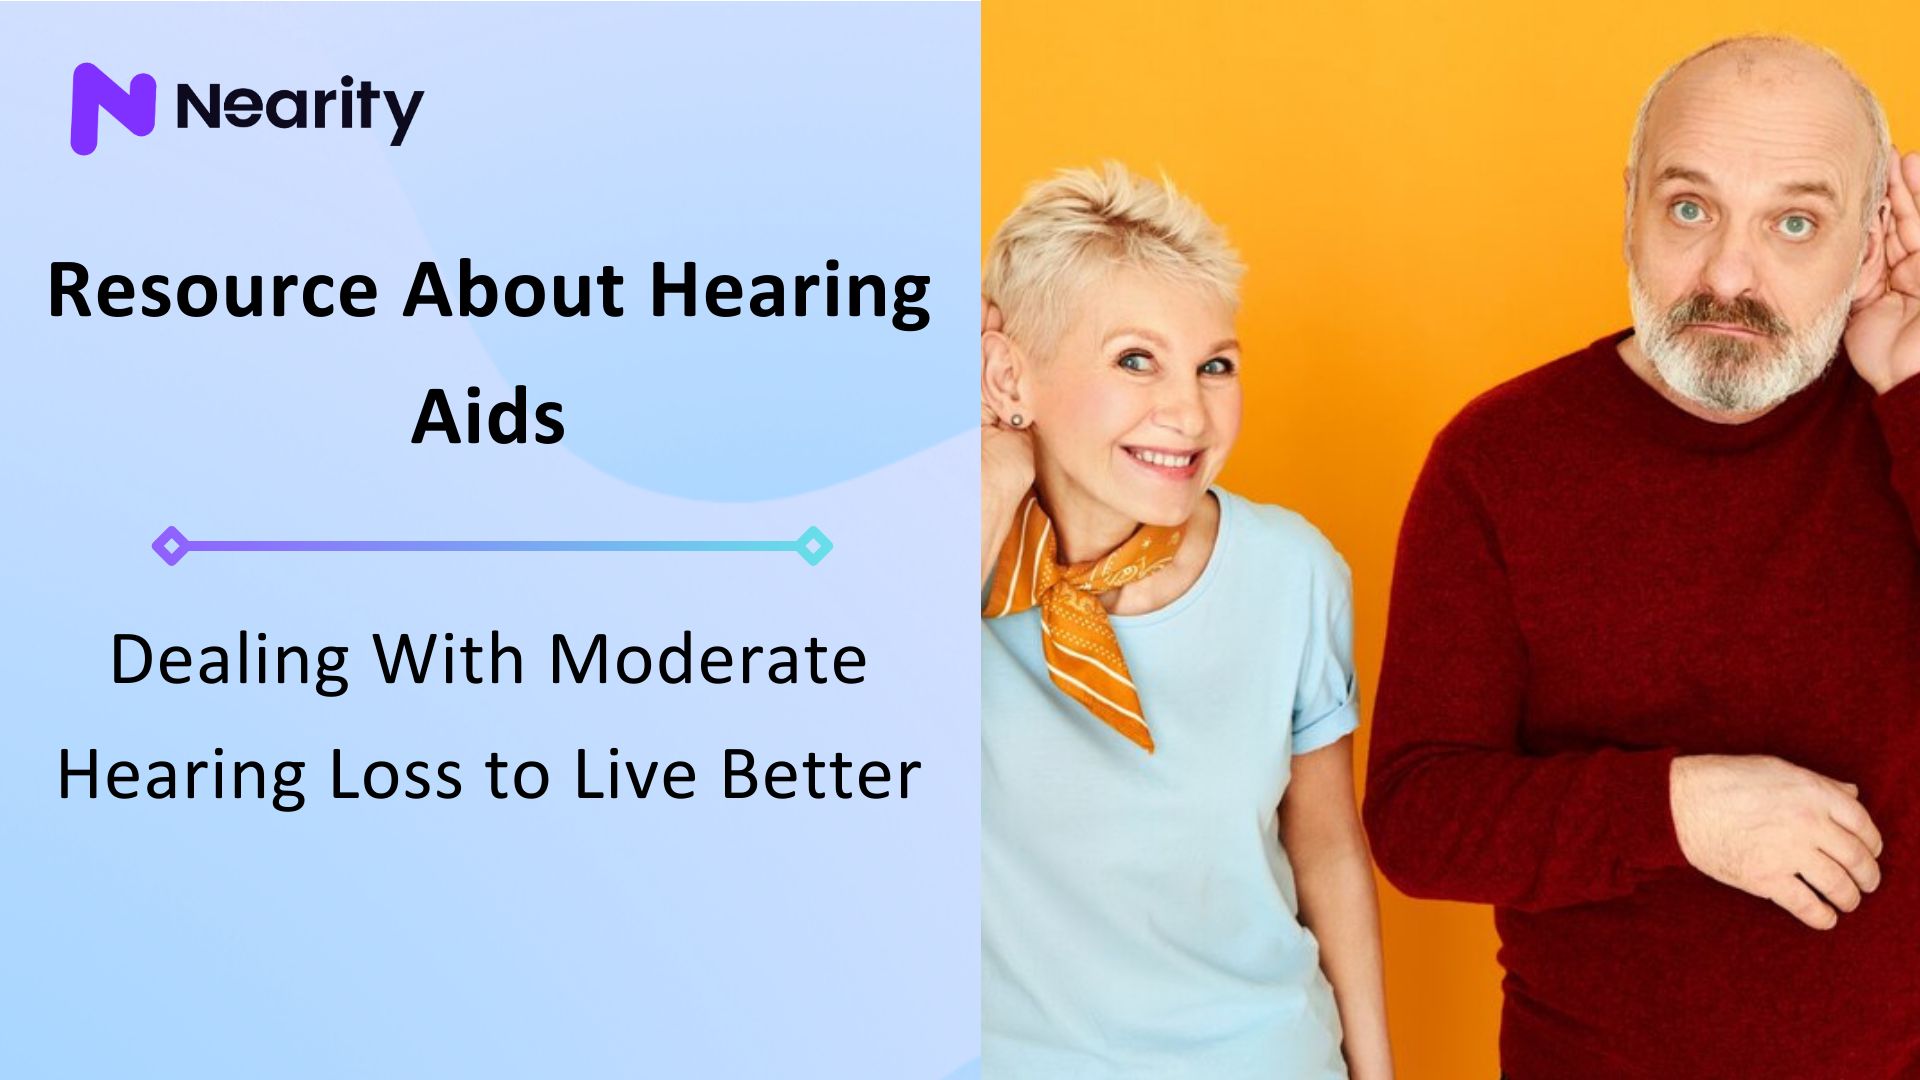 Dealing With Moderate Hearing Loss to Live Better